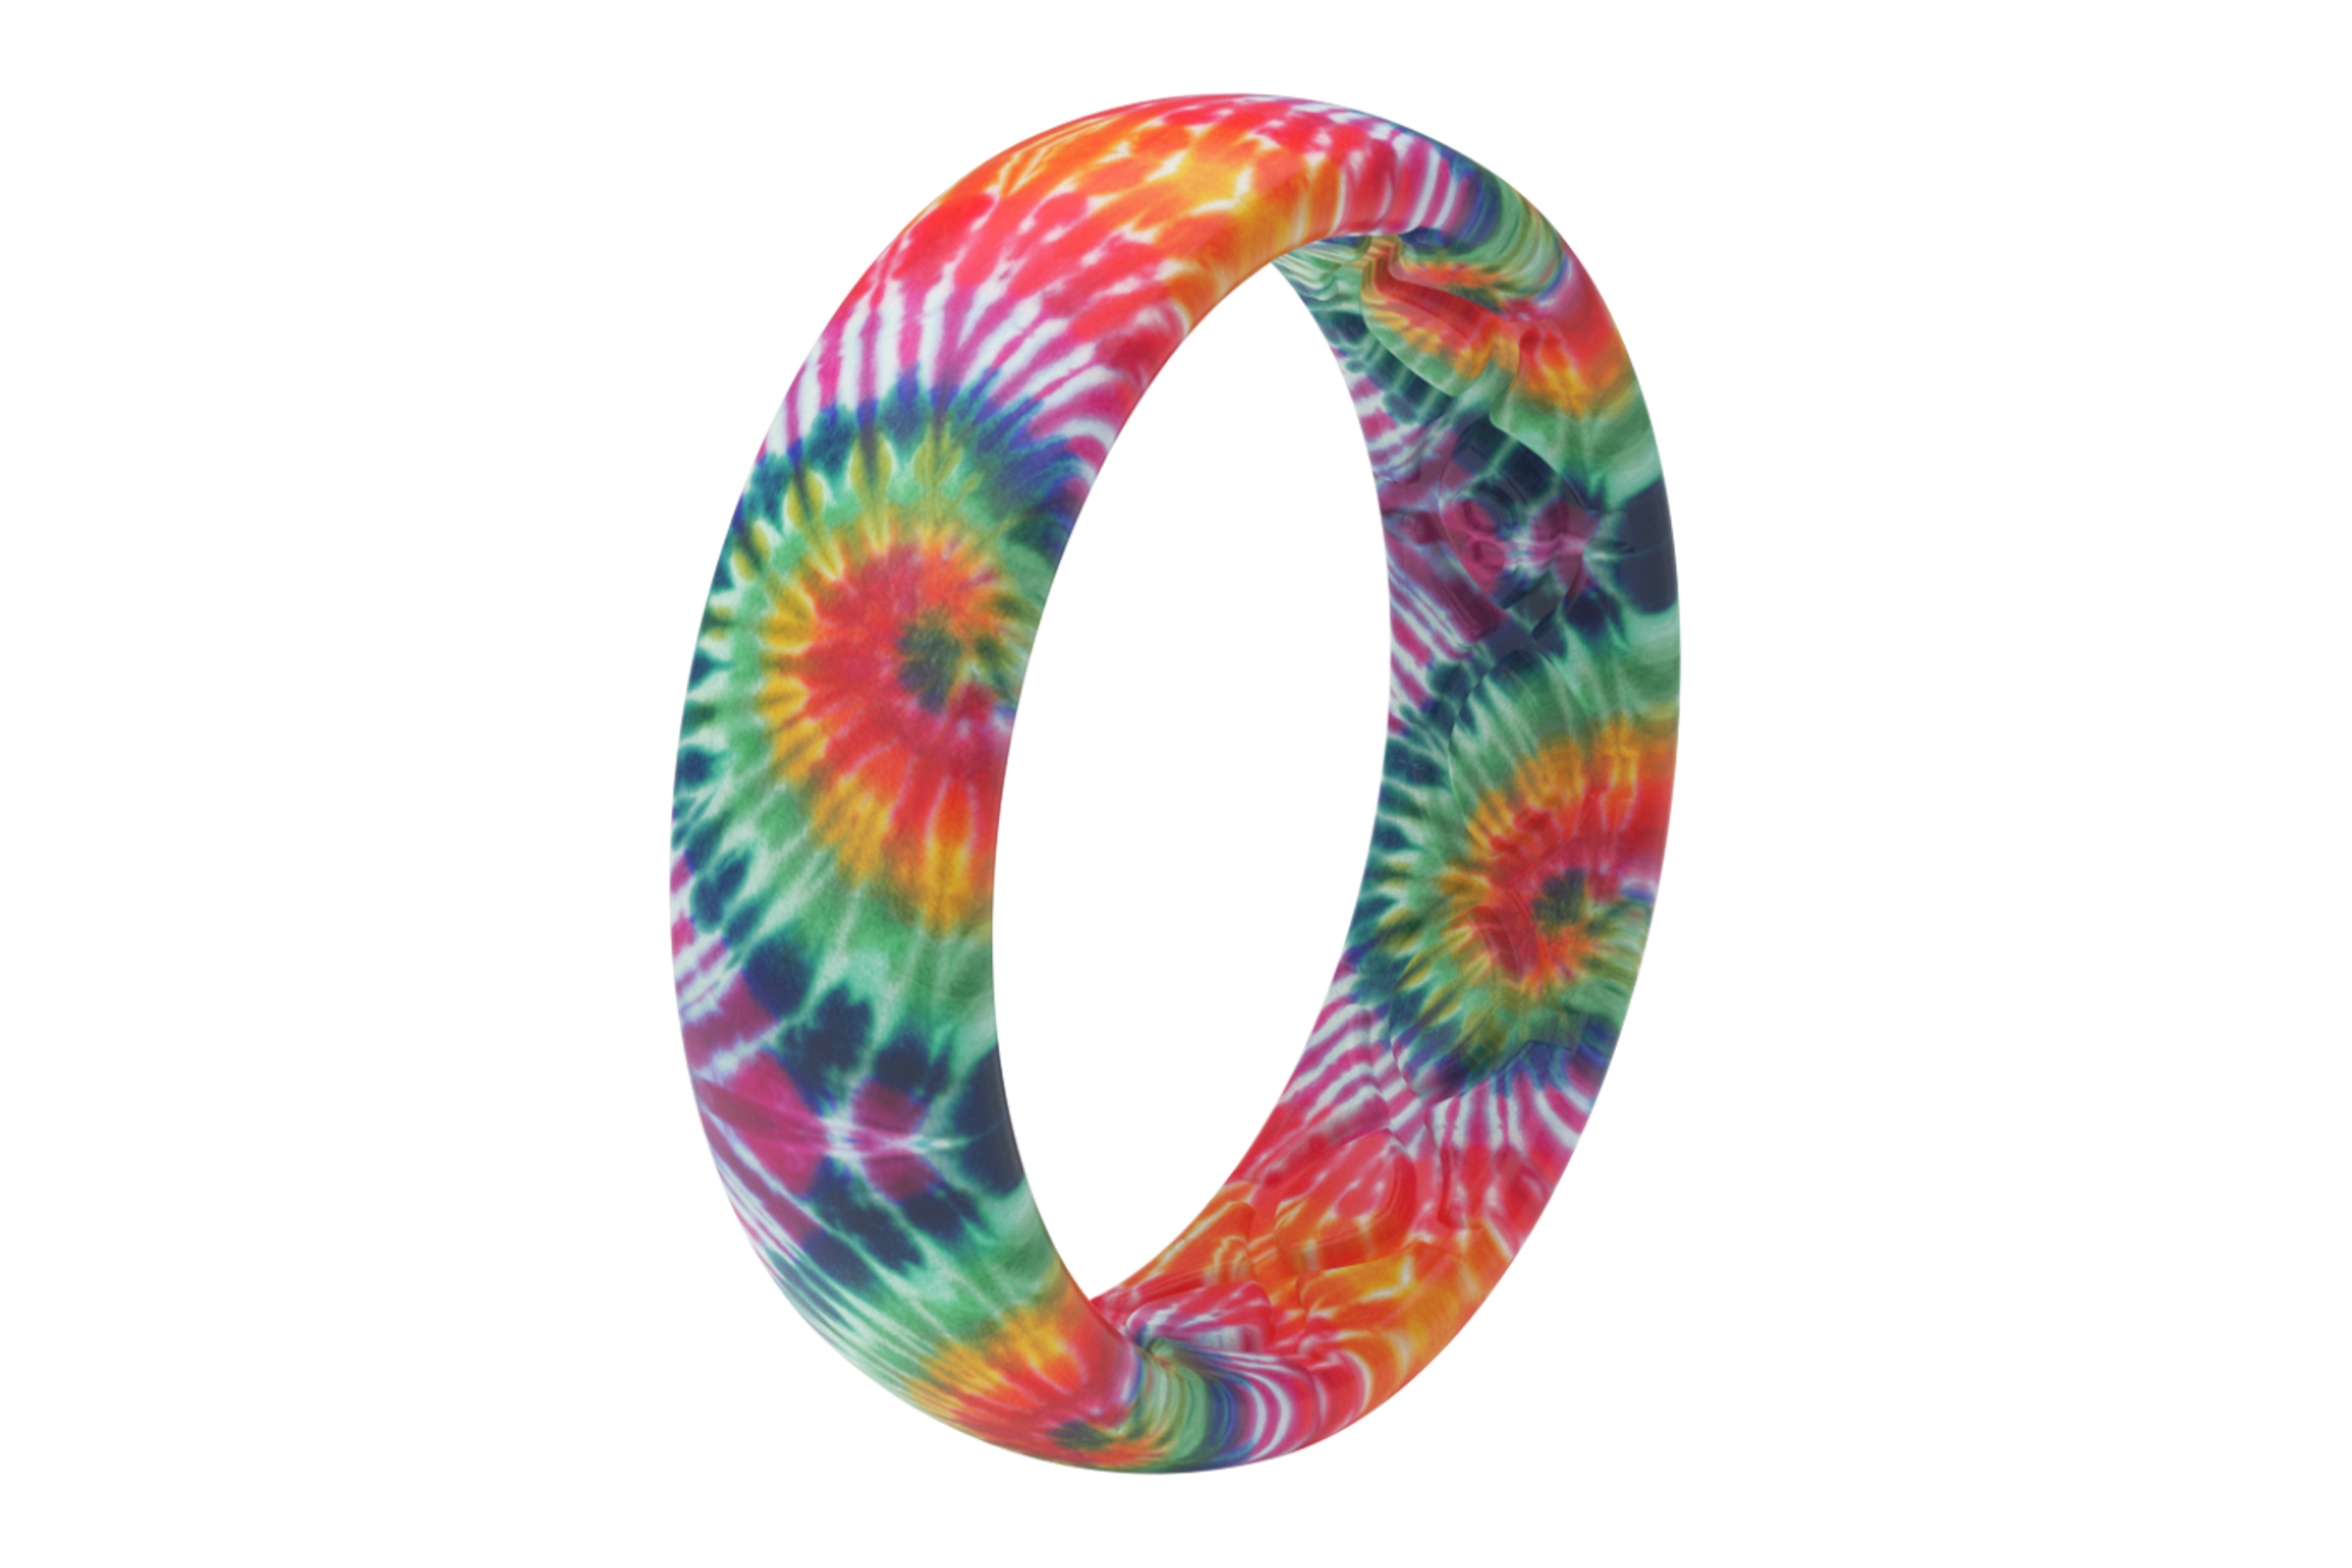 Groove Life Gypsy Eyes Thin Tie-Dye viewed on its side